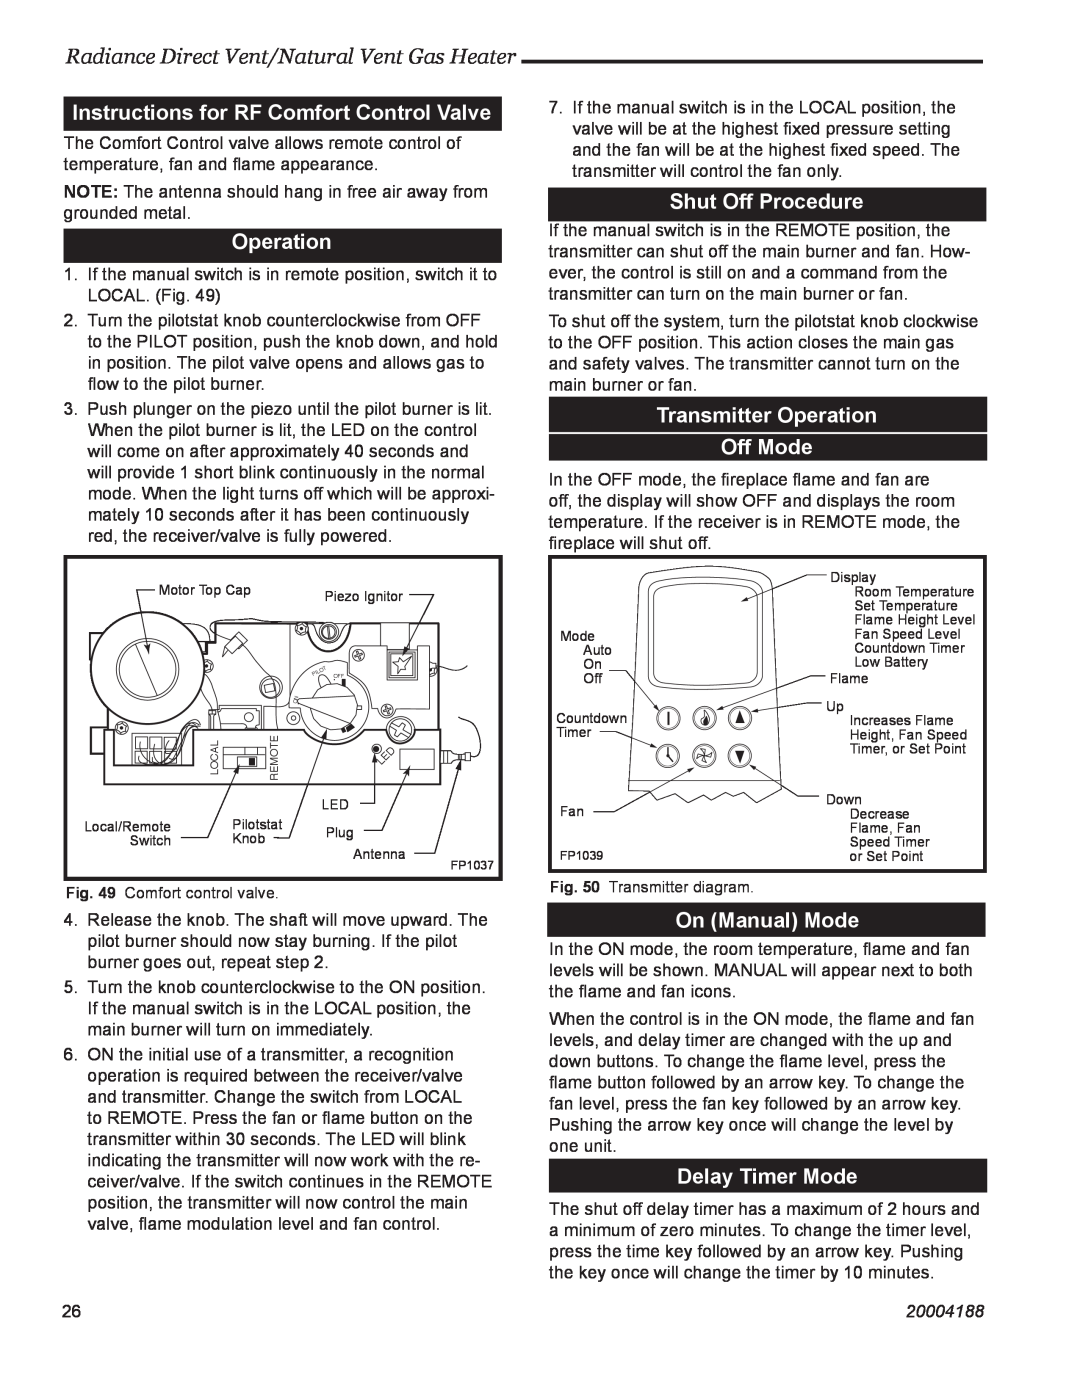 Vermont Casting 3354 Instructions for RF Comfort Control Valve, Operation, Shut Off Procedure, On Manual Mode, 20004188 